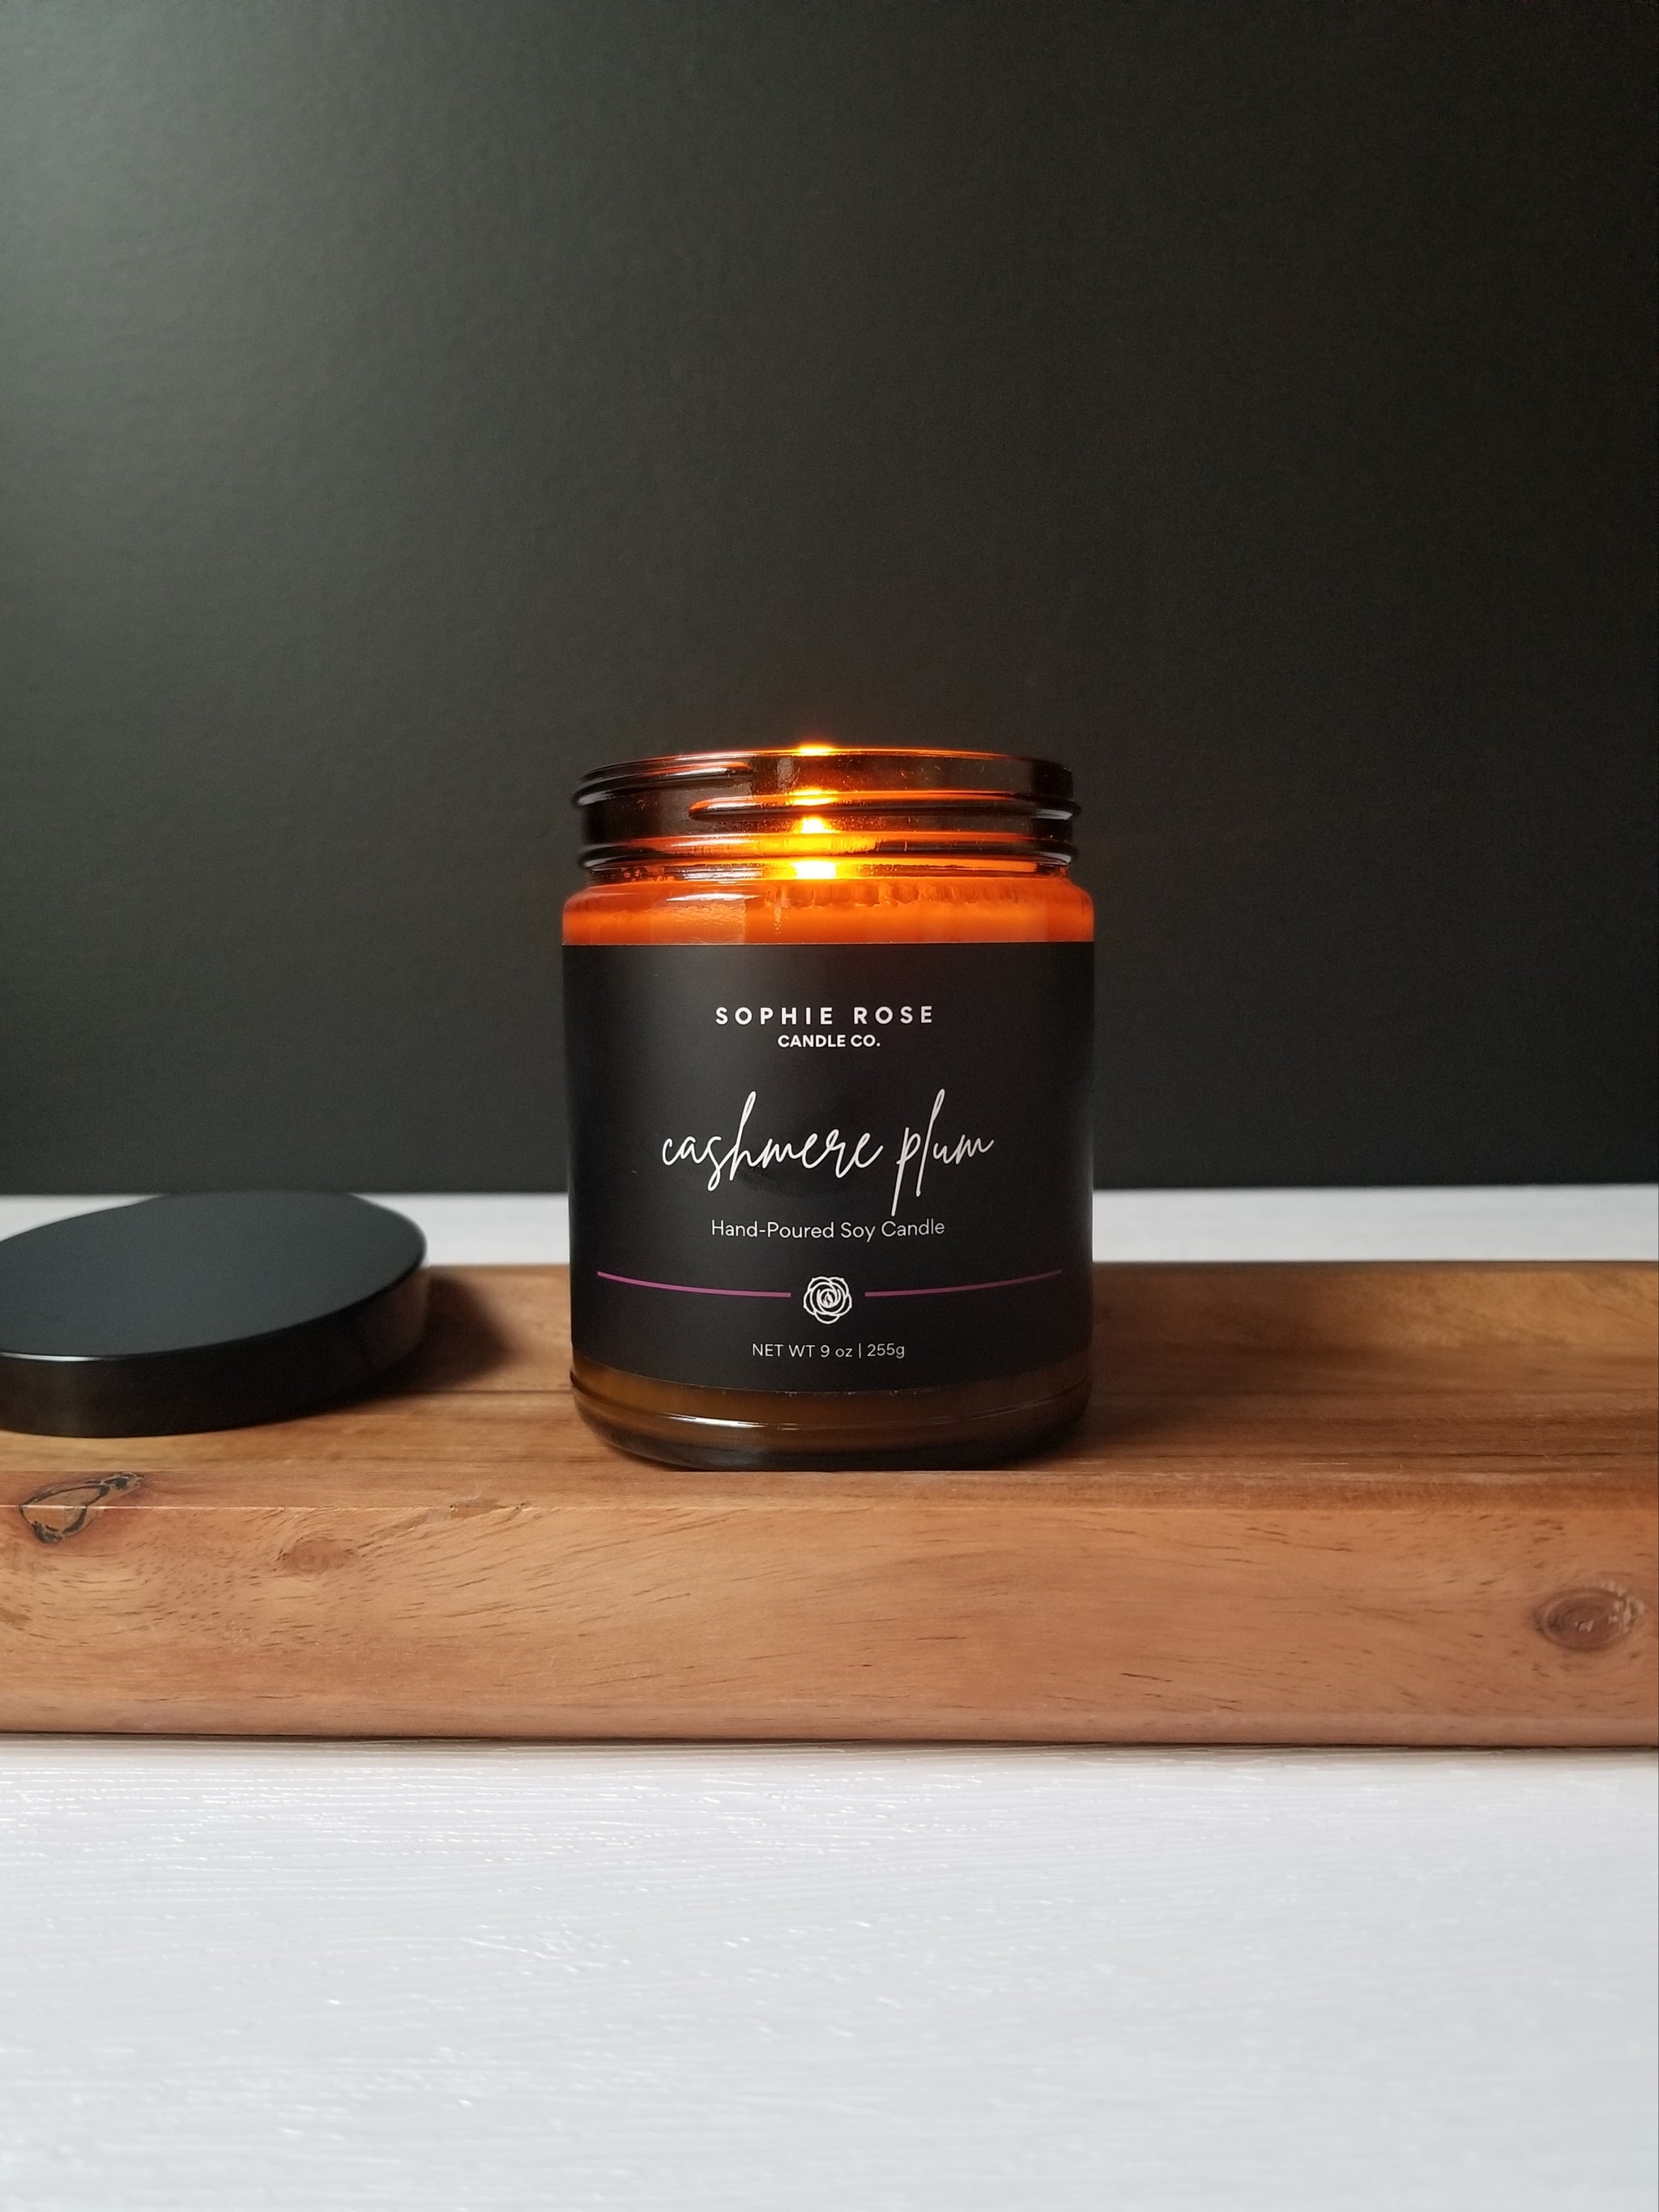 Signature Scents Collection: 16 oz Mason Jar Candle - Southern Elegance